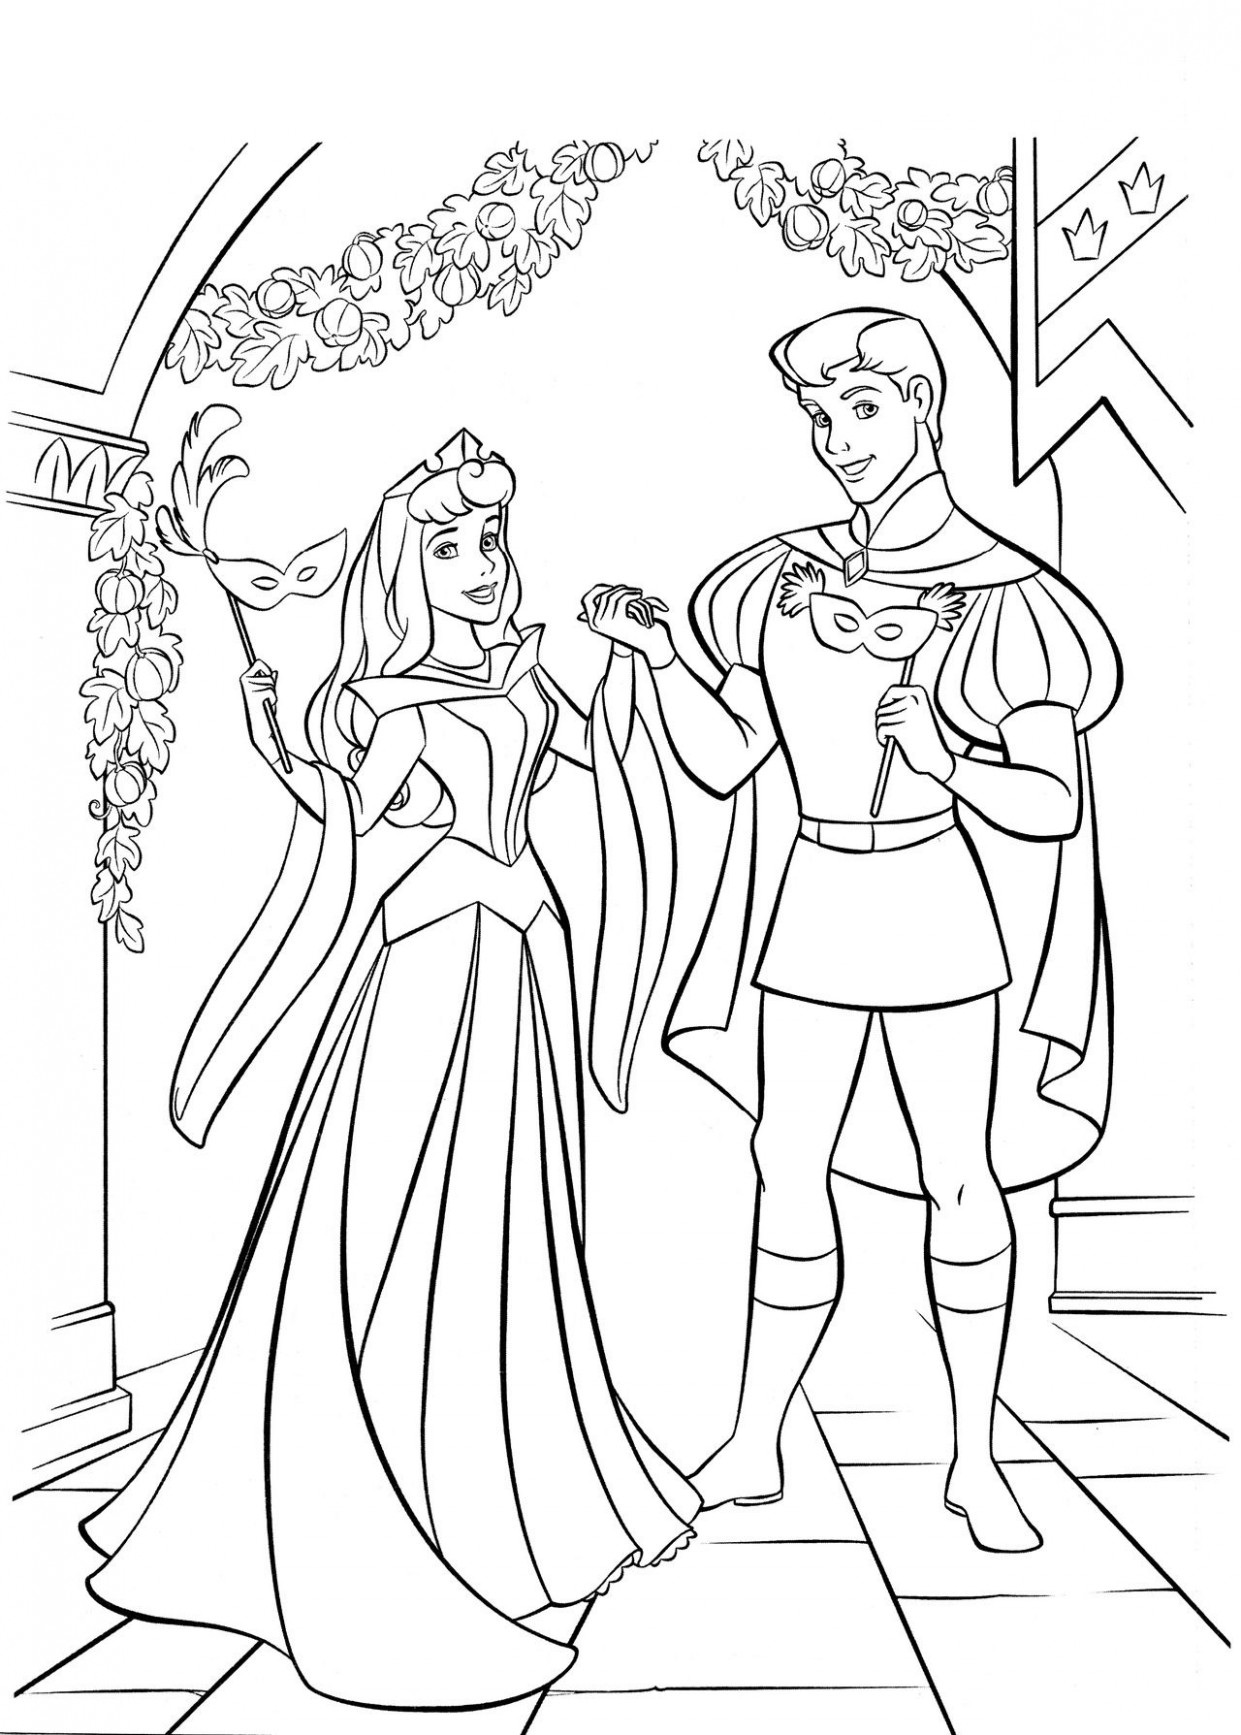 Sleeping Beauty and the Prince coloring book to print and online